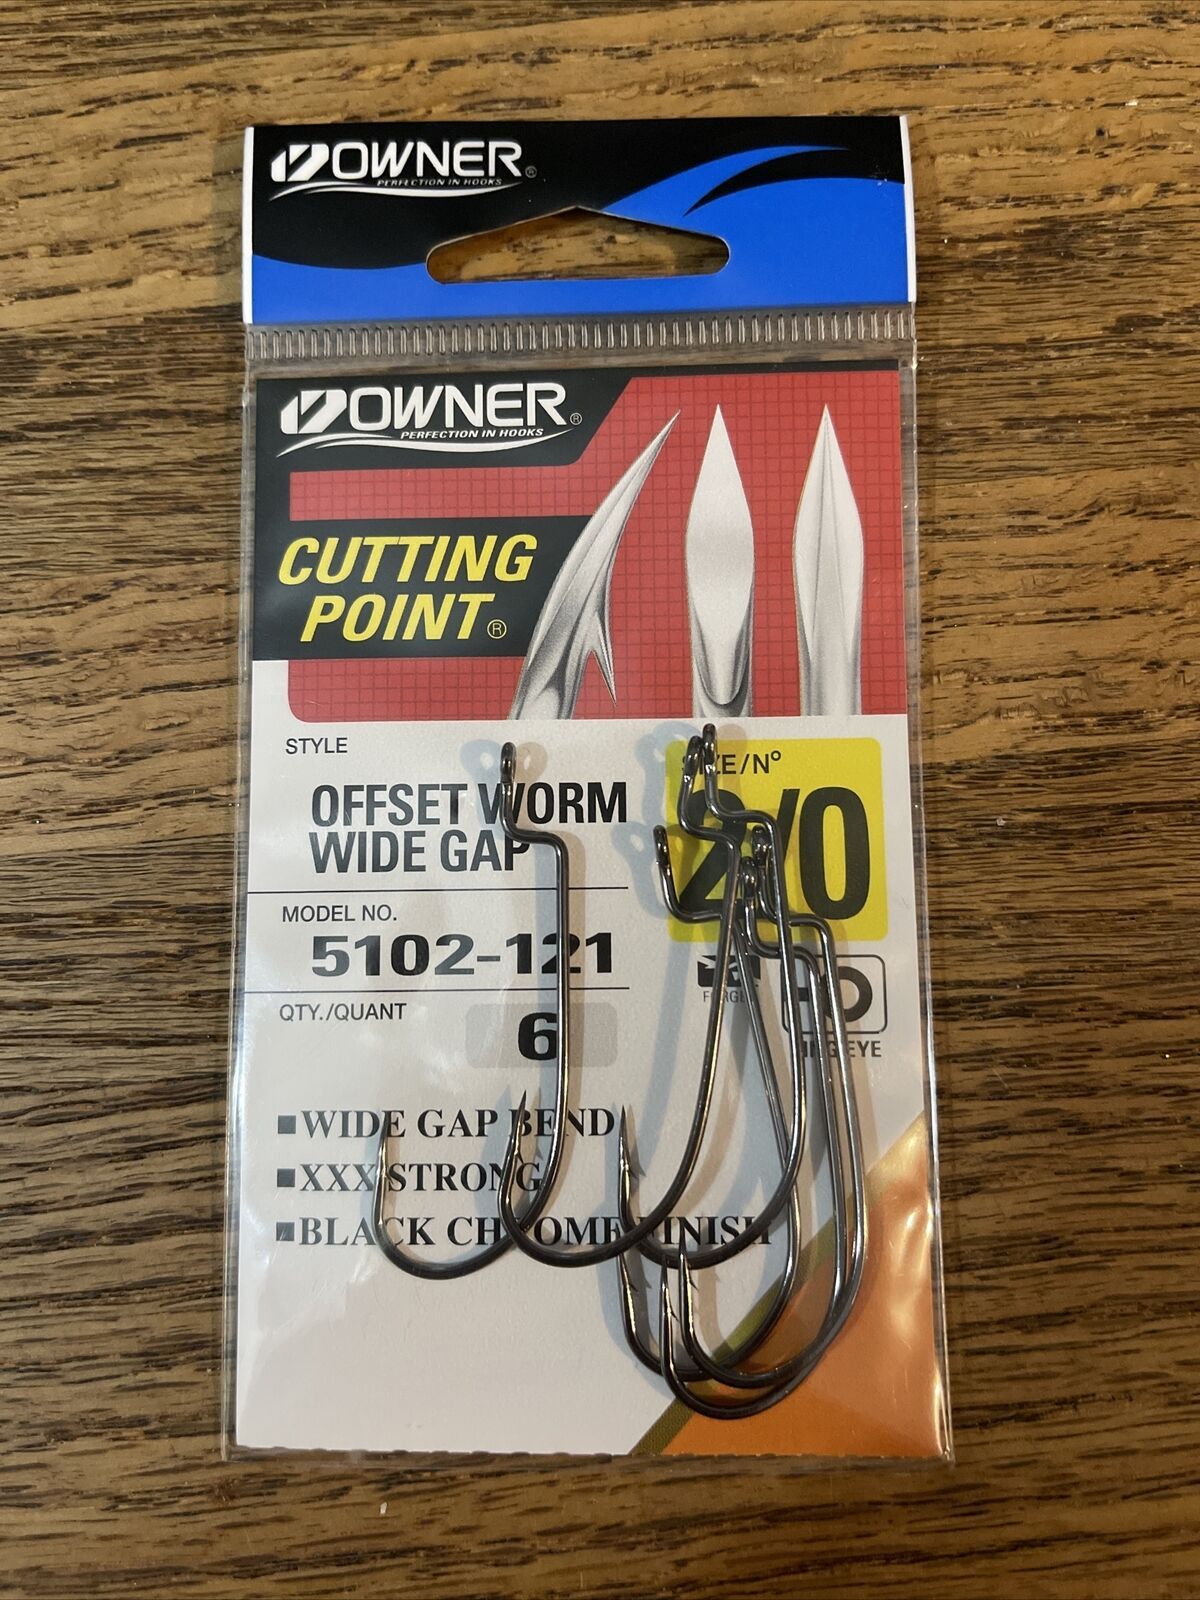 Owner cutting point offset worm wide gap hook size 2/0